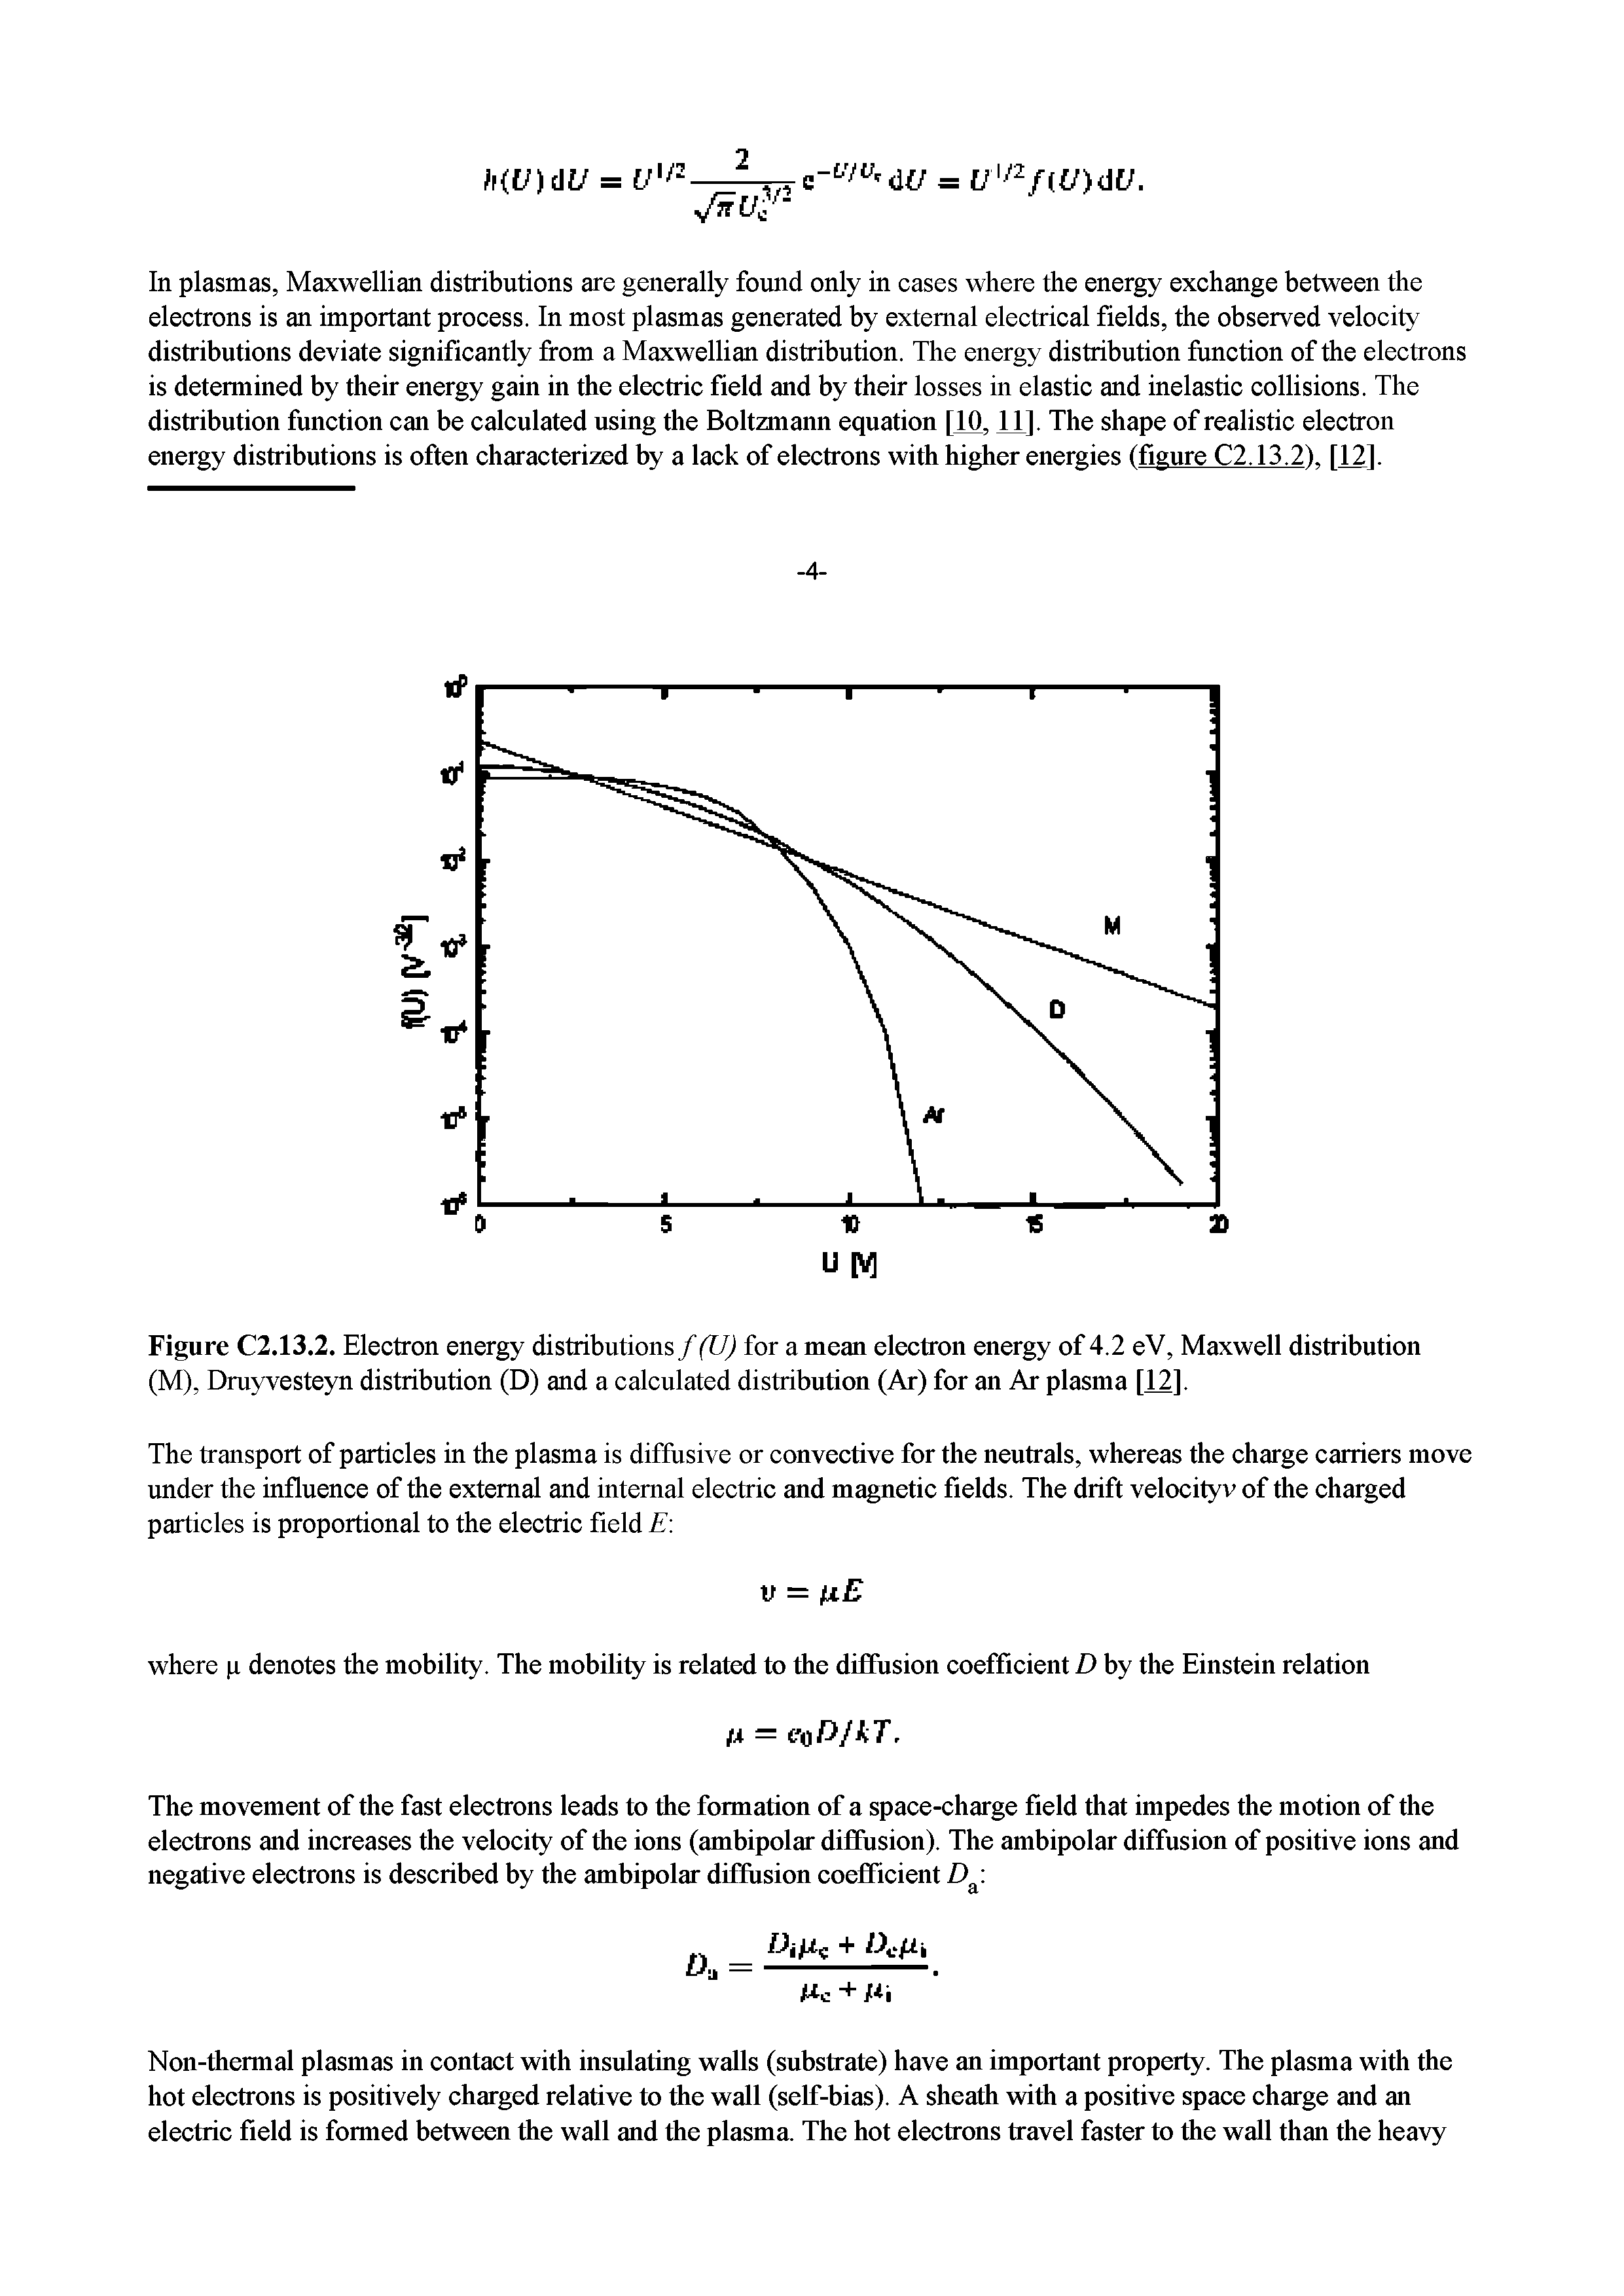 Figure C2.13.2. Eleetron energy distributions f (U)iox a mean electron energy of 4.2 eV, Maxwell distribution (M), Druyvesteyn distribution (D) and a calculated distribution (Ar) for an Ar plasma [12].